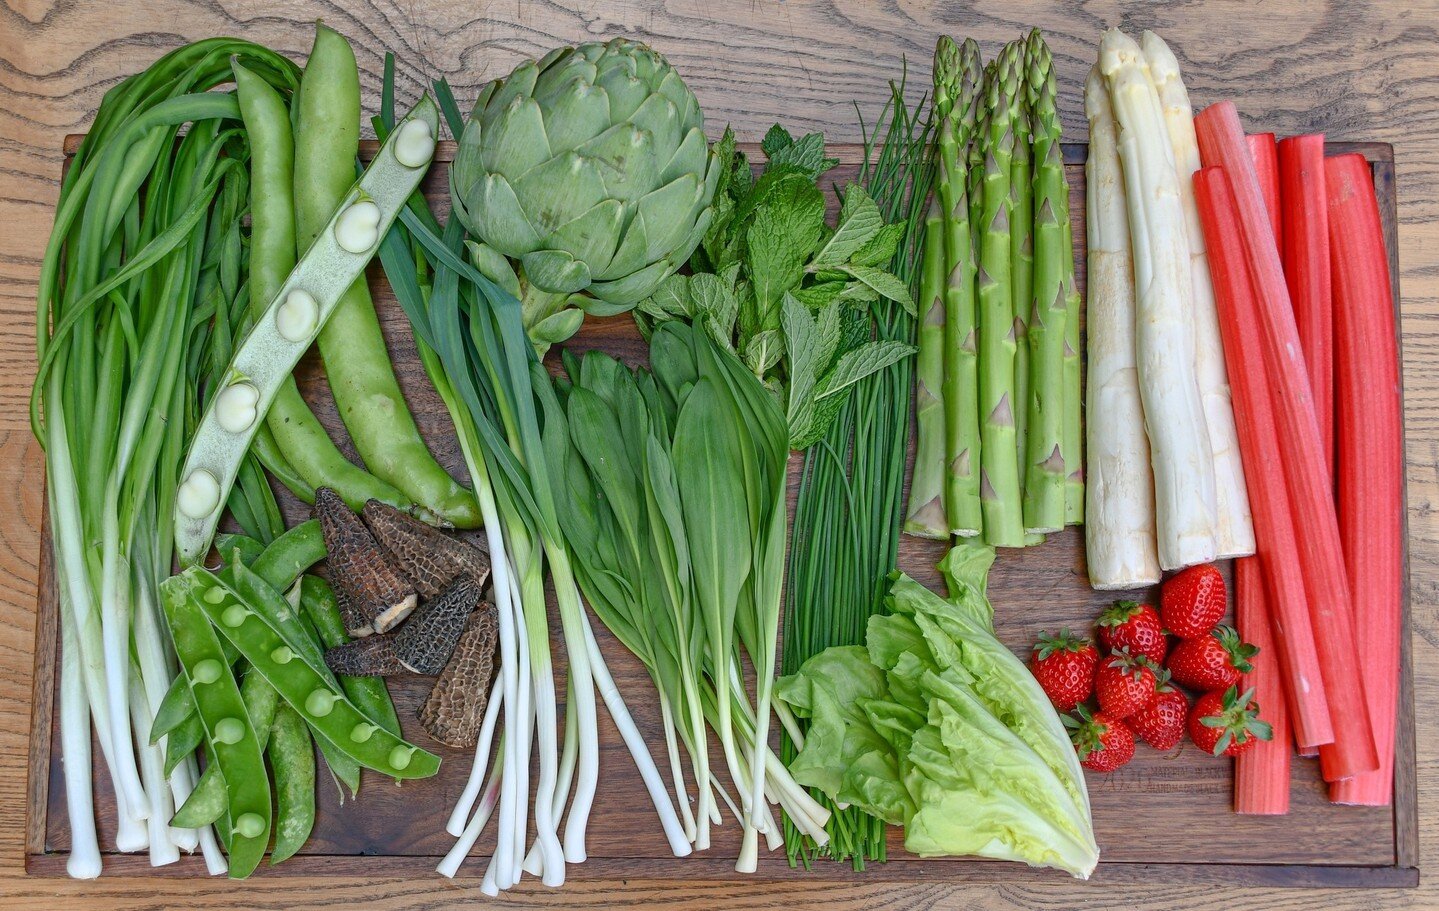 Experience the arrival of spring and its abundant harvest 🥬⁠
⁠
Our kitchen prides itself on sourcing locally foraged vegetables with a limited seasonal window. Whether it's foraged ramps, white asparagus, or tangy rhubarb, we choose the freshest ing